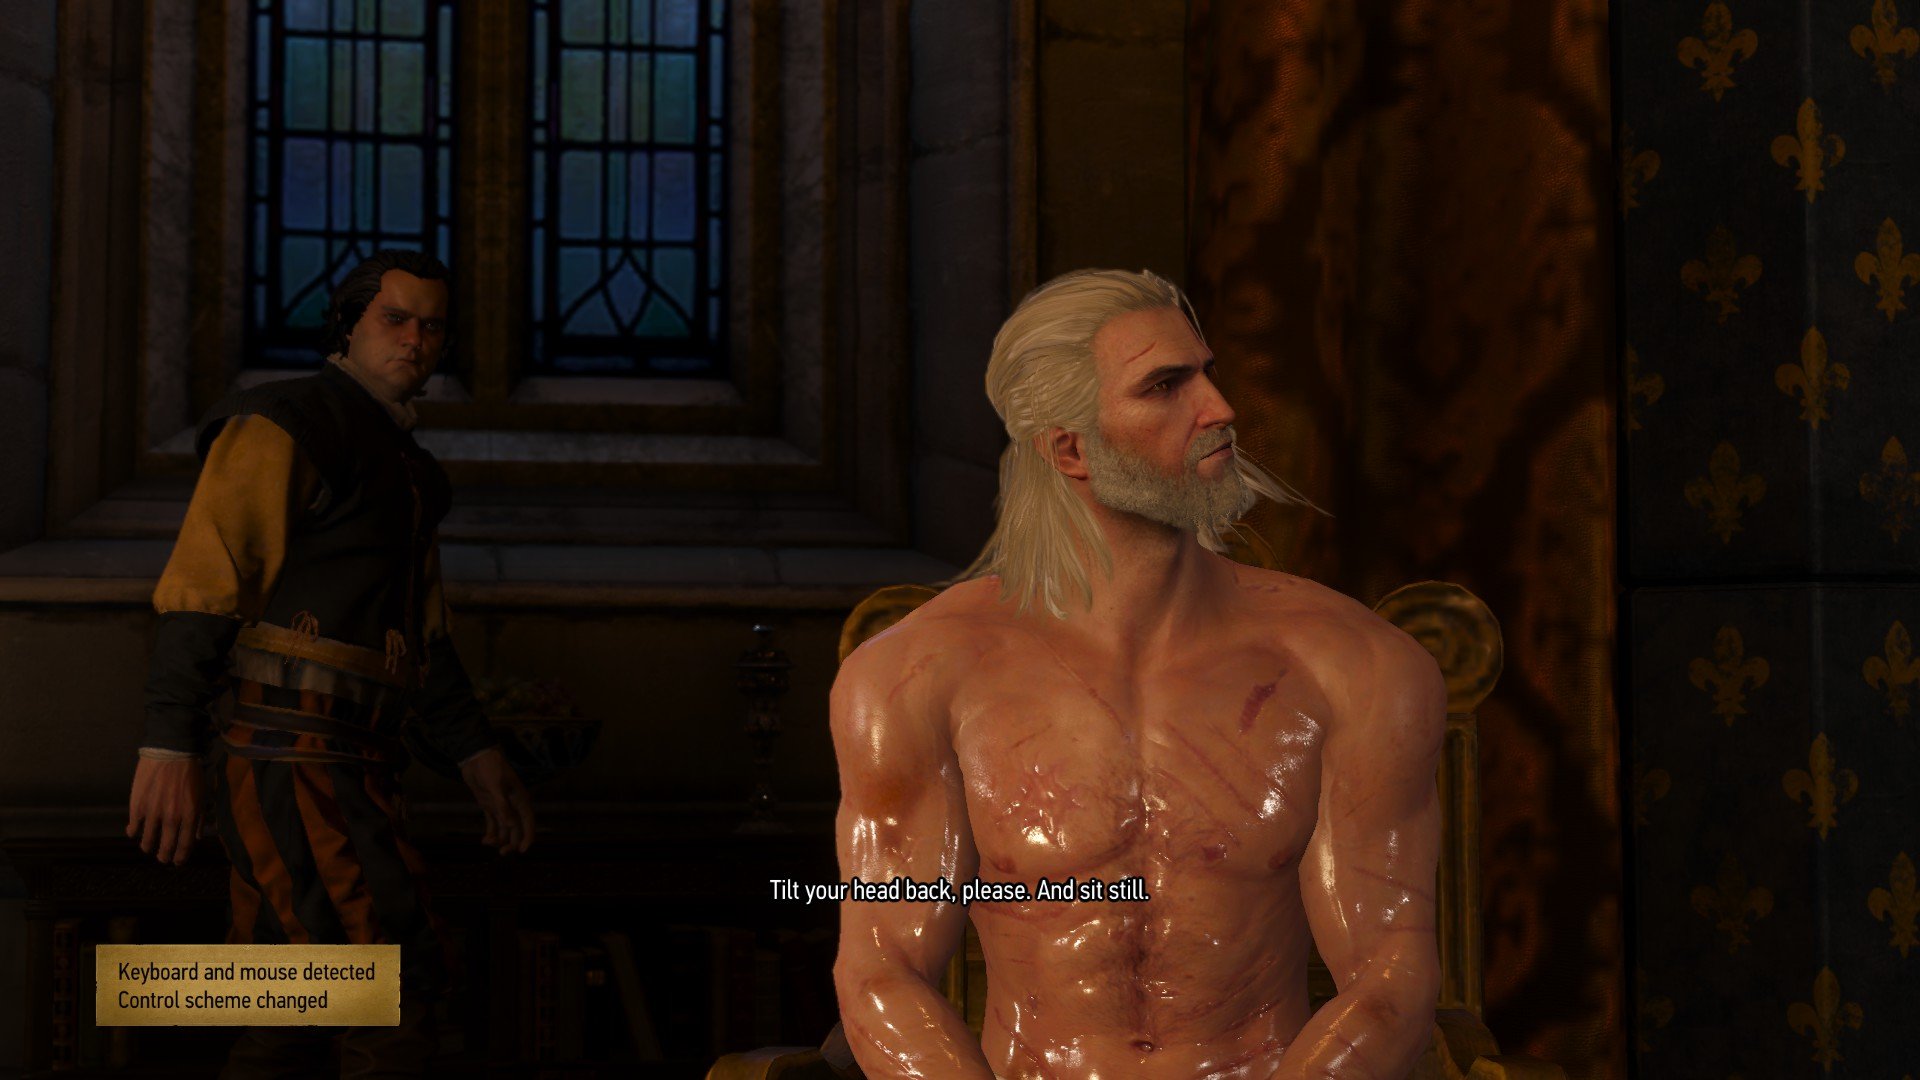 The Witcher 3 Wild Hunt Review Attack Of The Fanboy